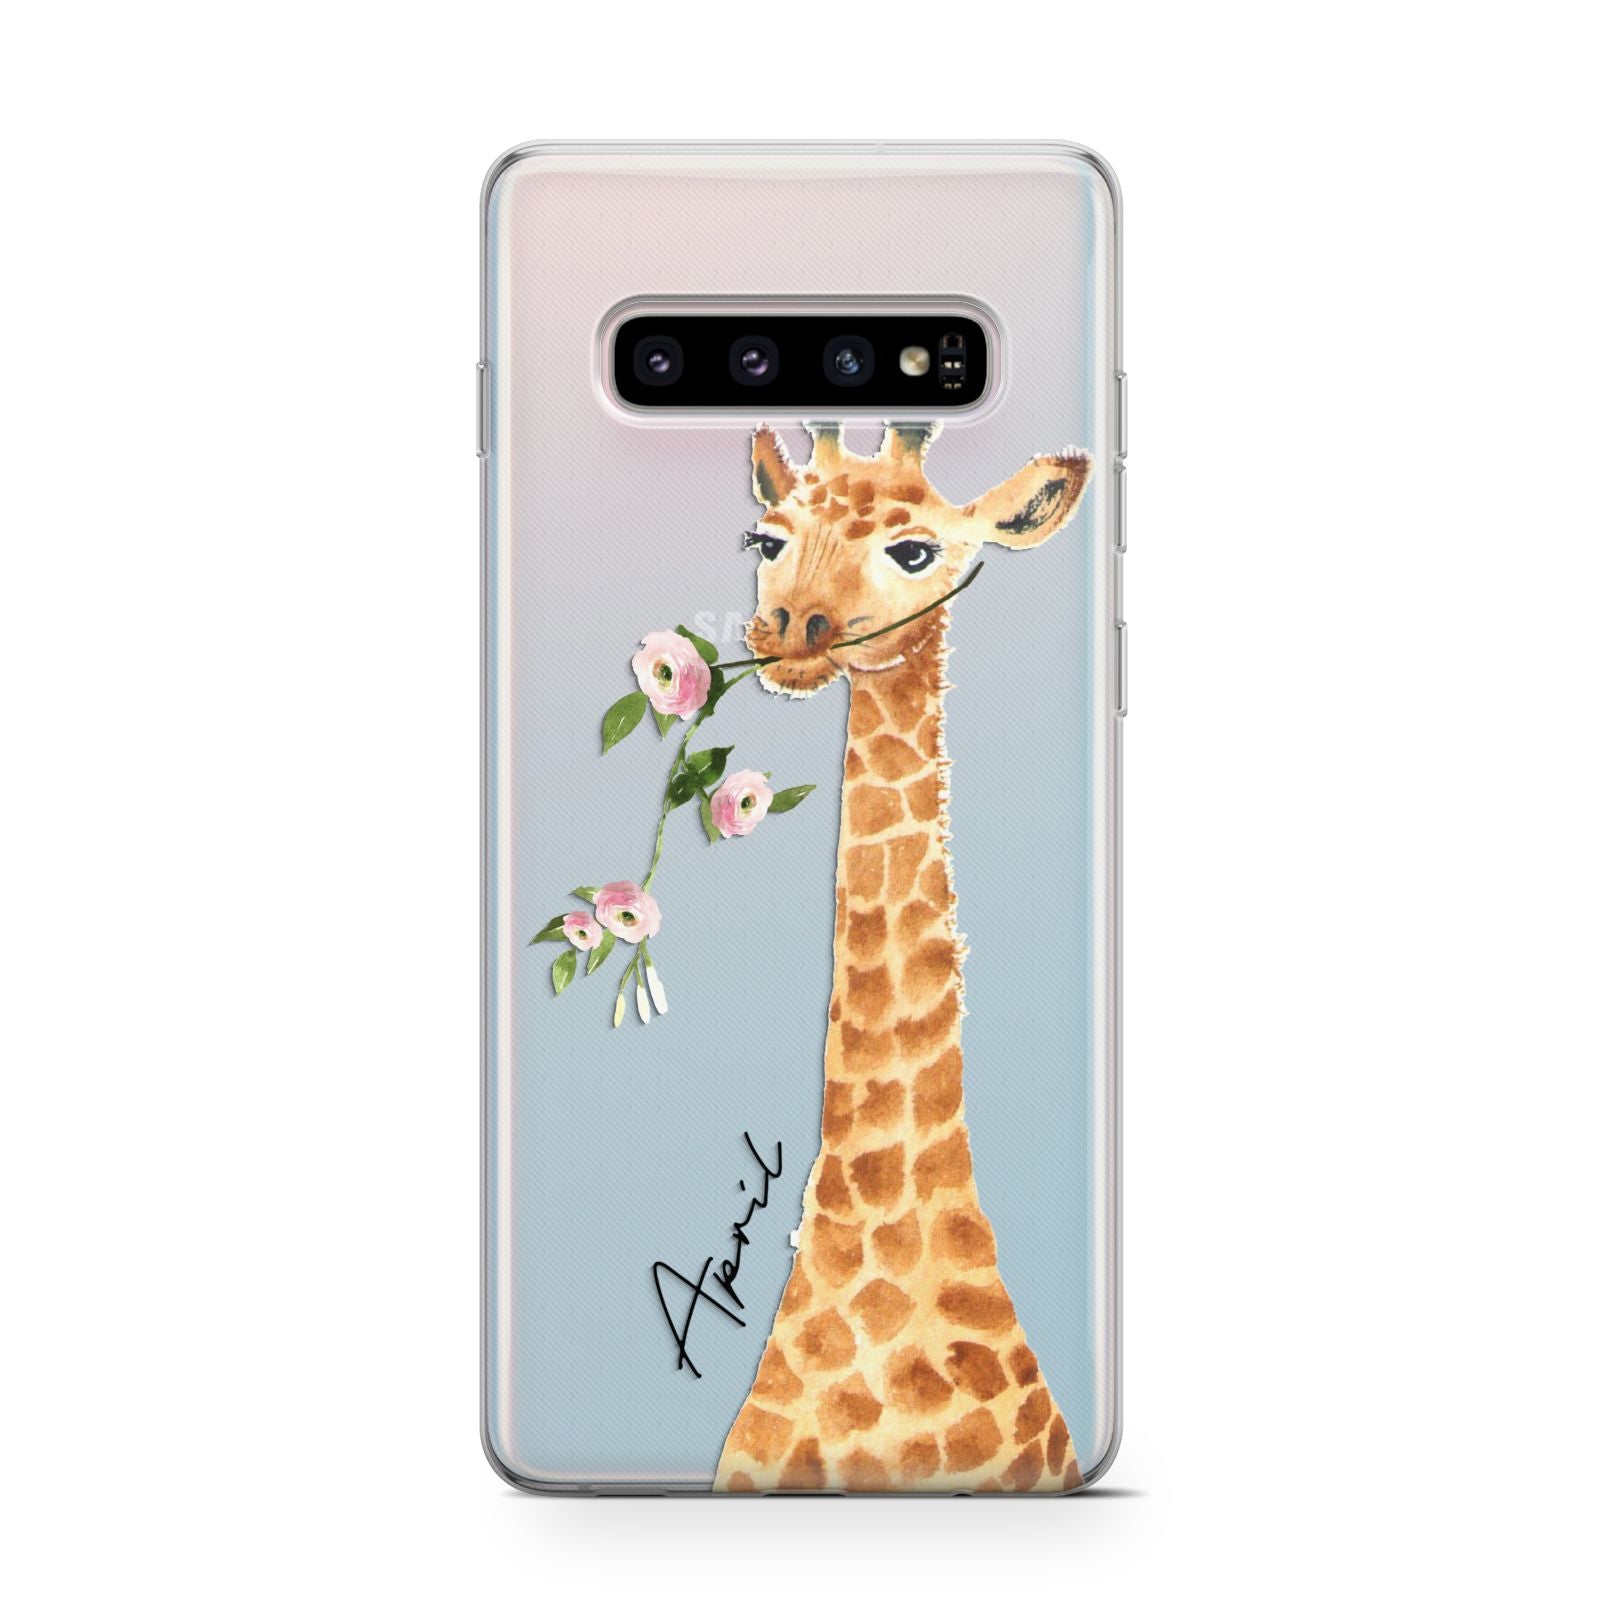 Personalised Giraffe with Name Samsung Galaxy S10 Case